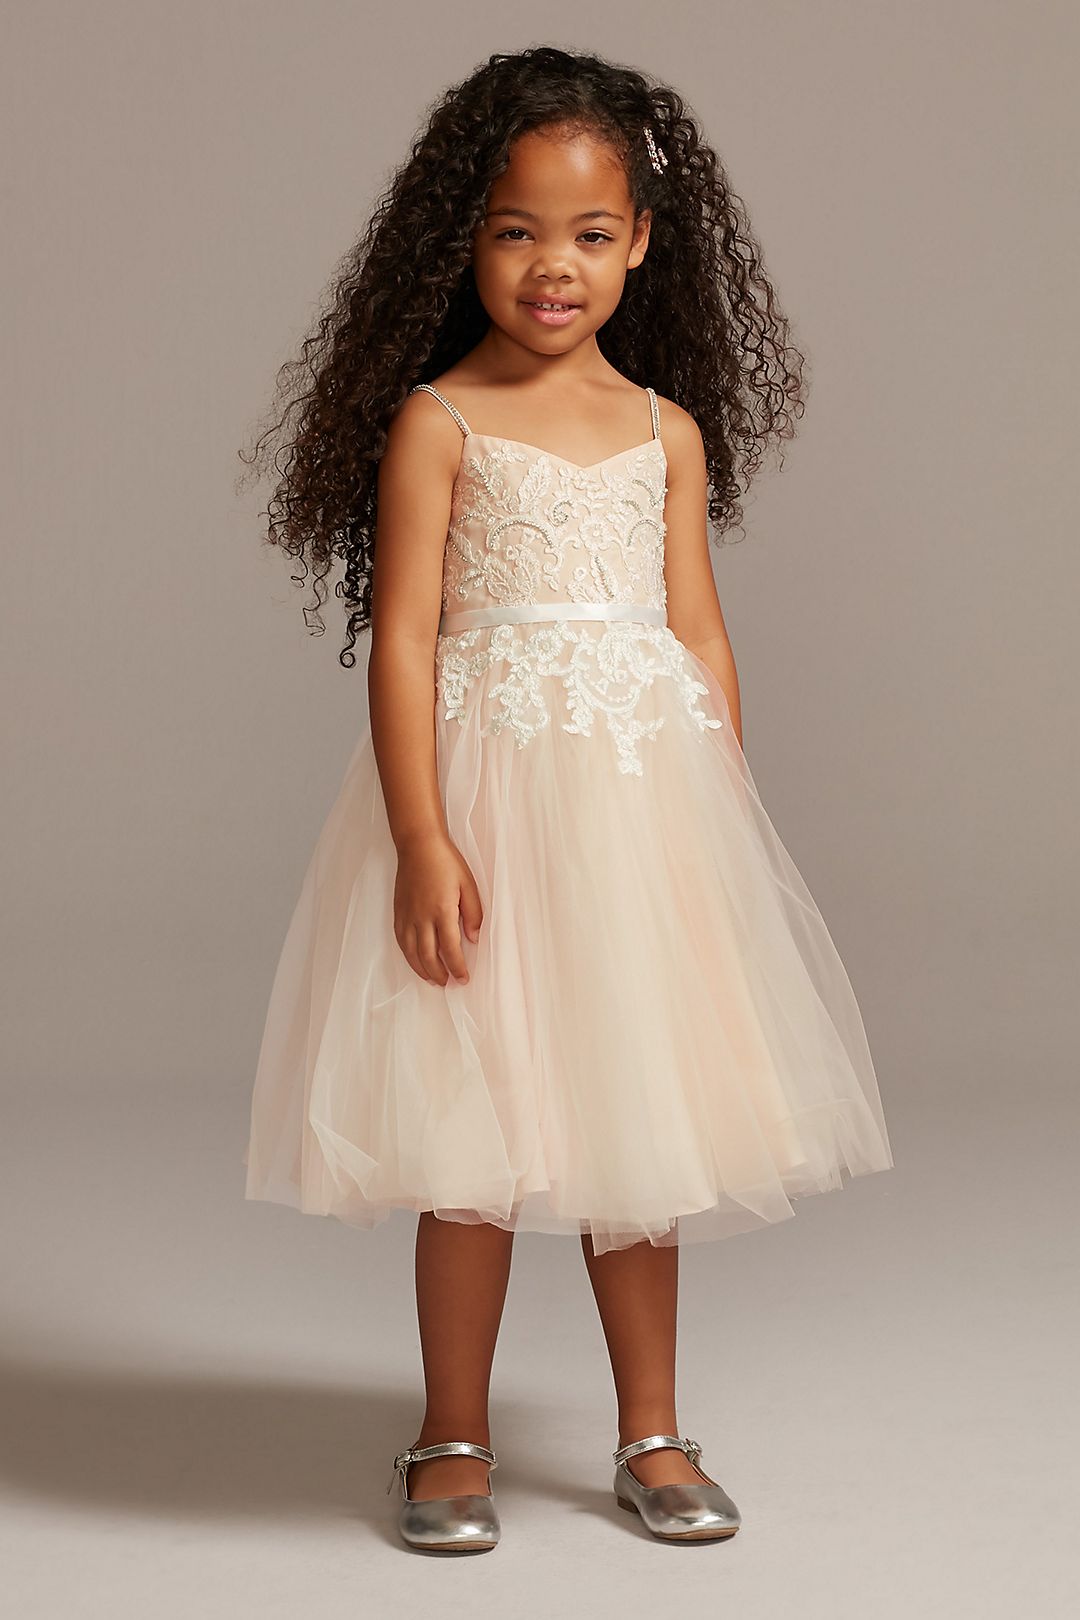 As Is Applique Spaghetti Strap Flower Girl Dress Image 1